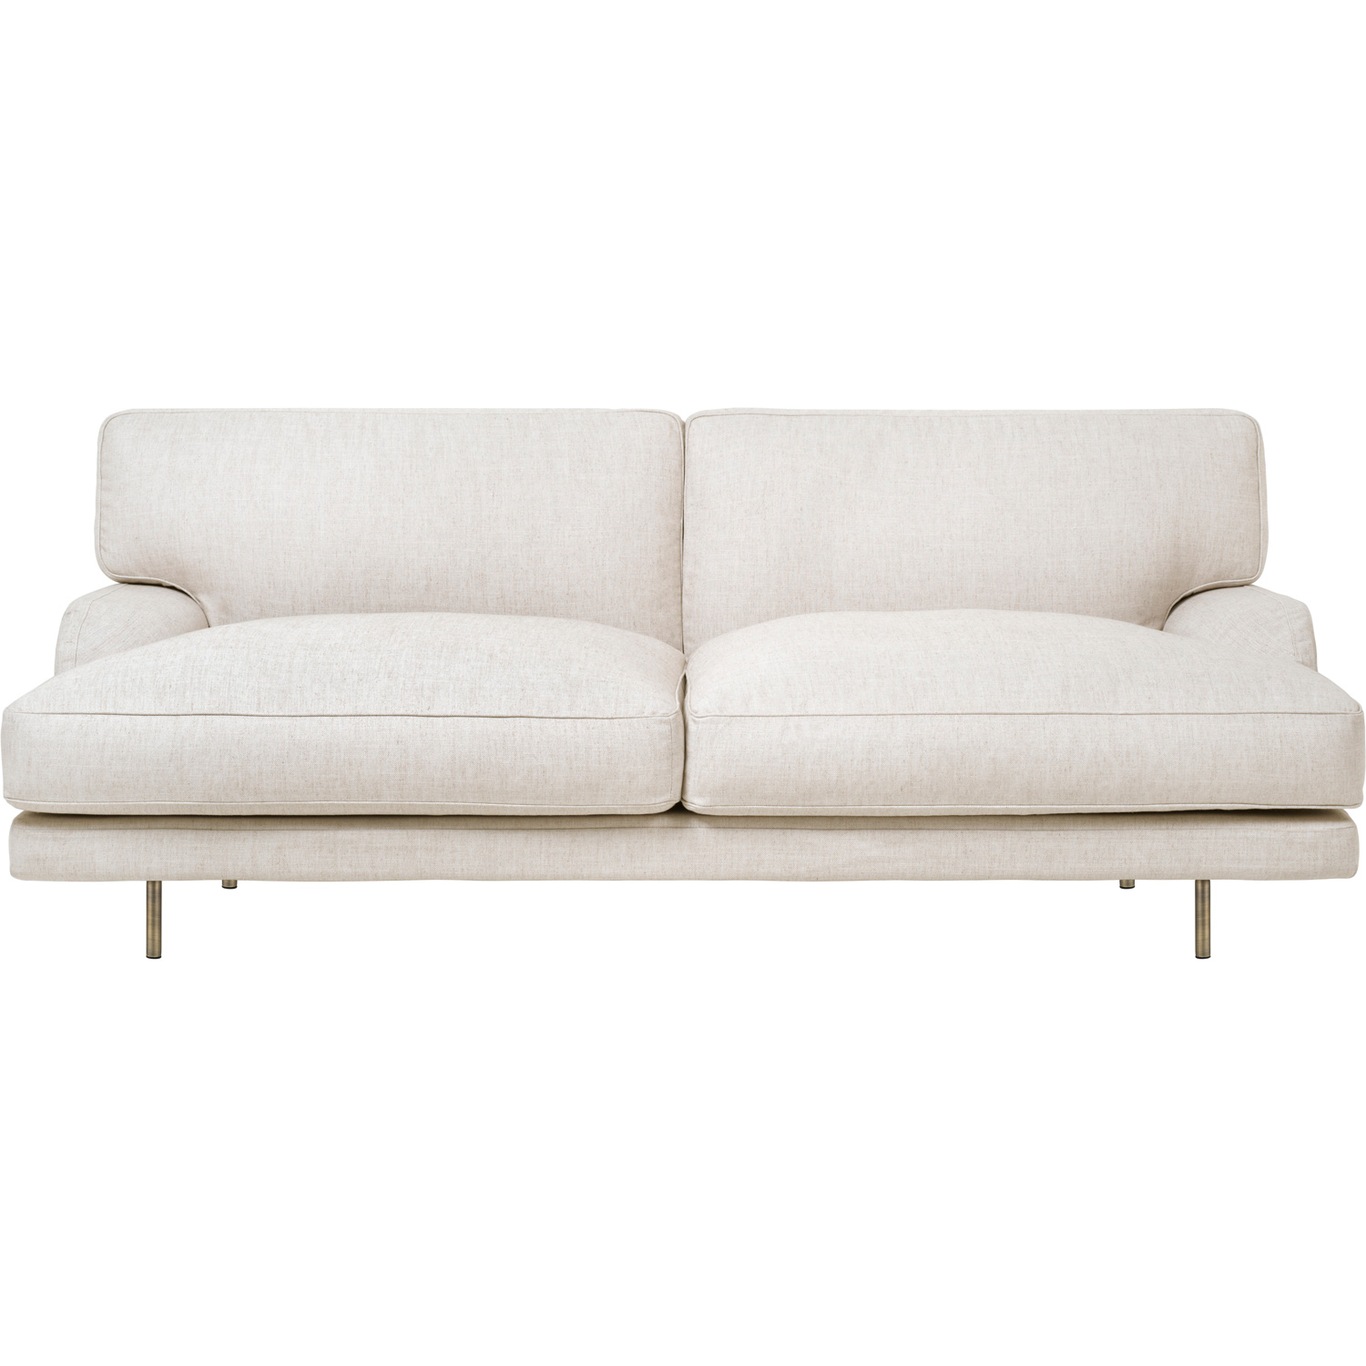 Flaneur Sofa FC 2,5-seters, Ben Messing / Hot Madison 419 Off White